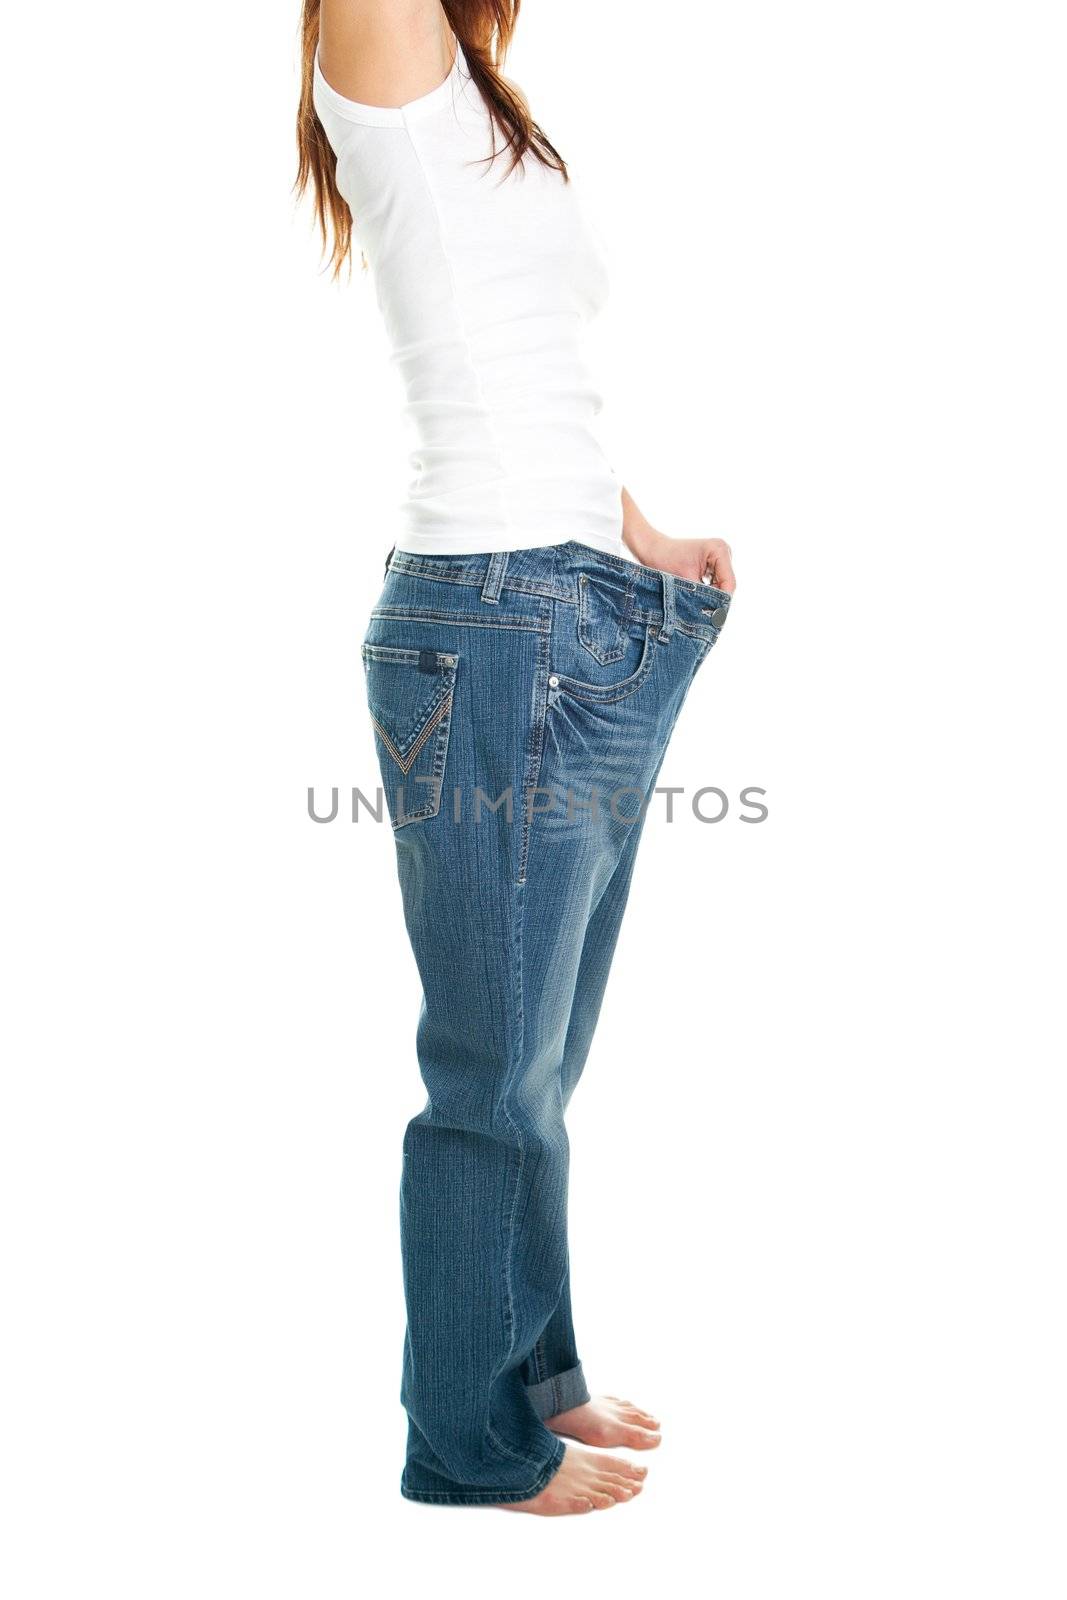 Slim woman pulling oversized jeans by AndreyPopov